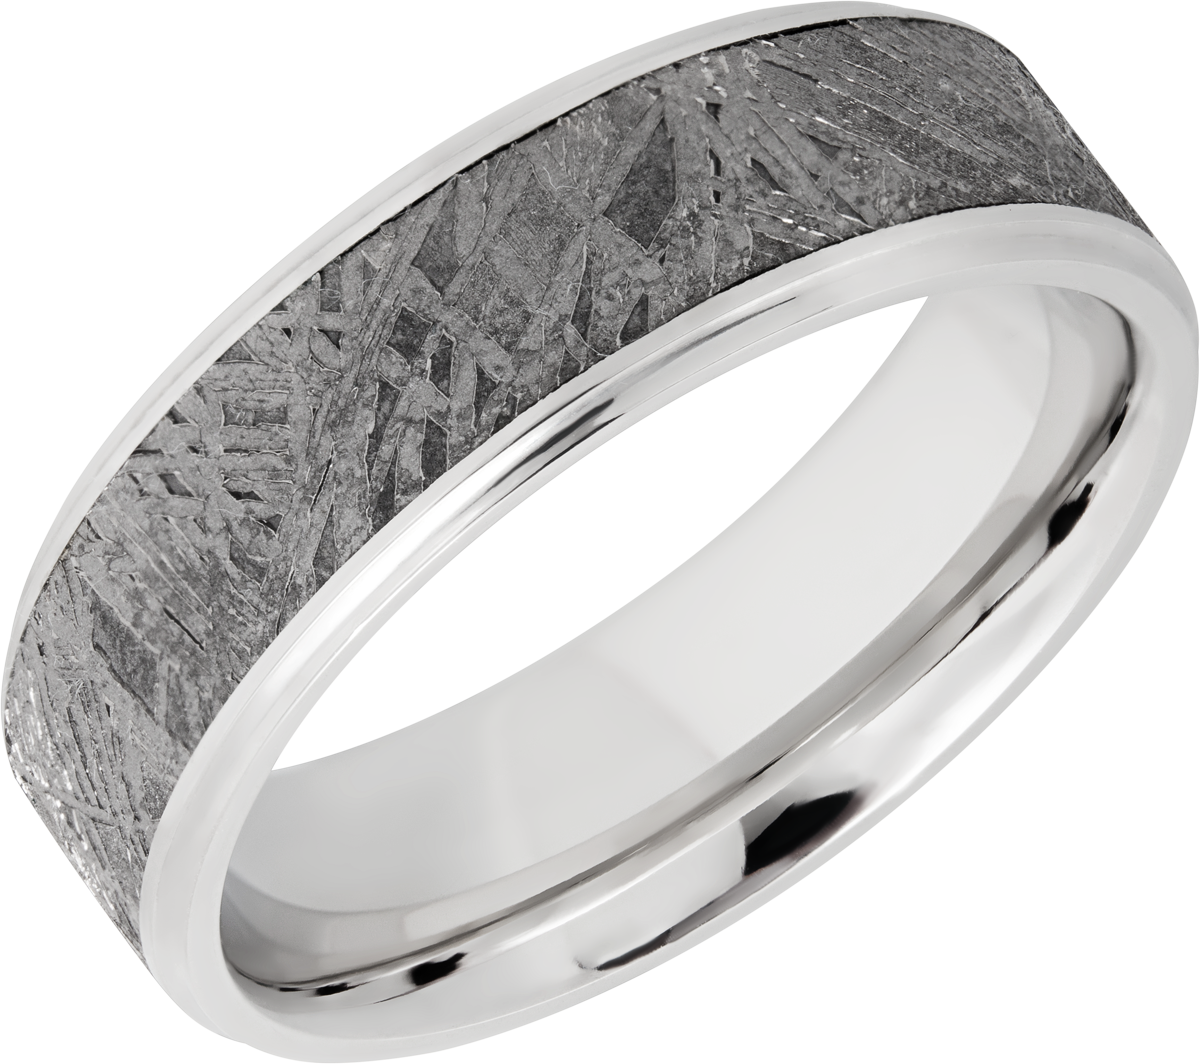 Cobalt chrome 7mm beveled edge band with one inlay that is 5mm wide of meteorite. (NS)= No step POL